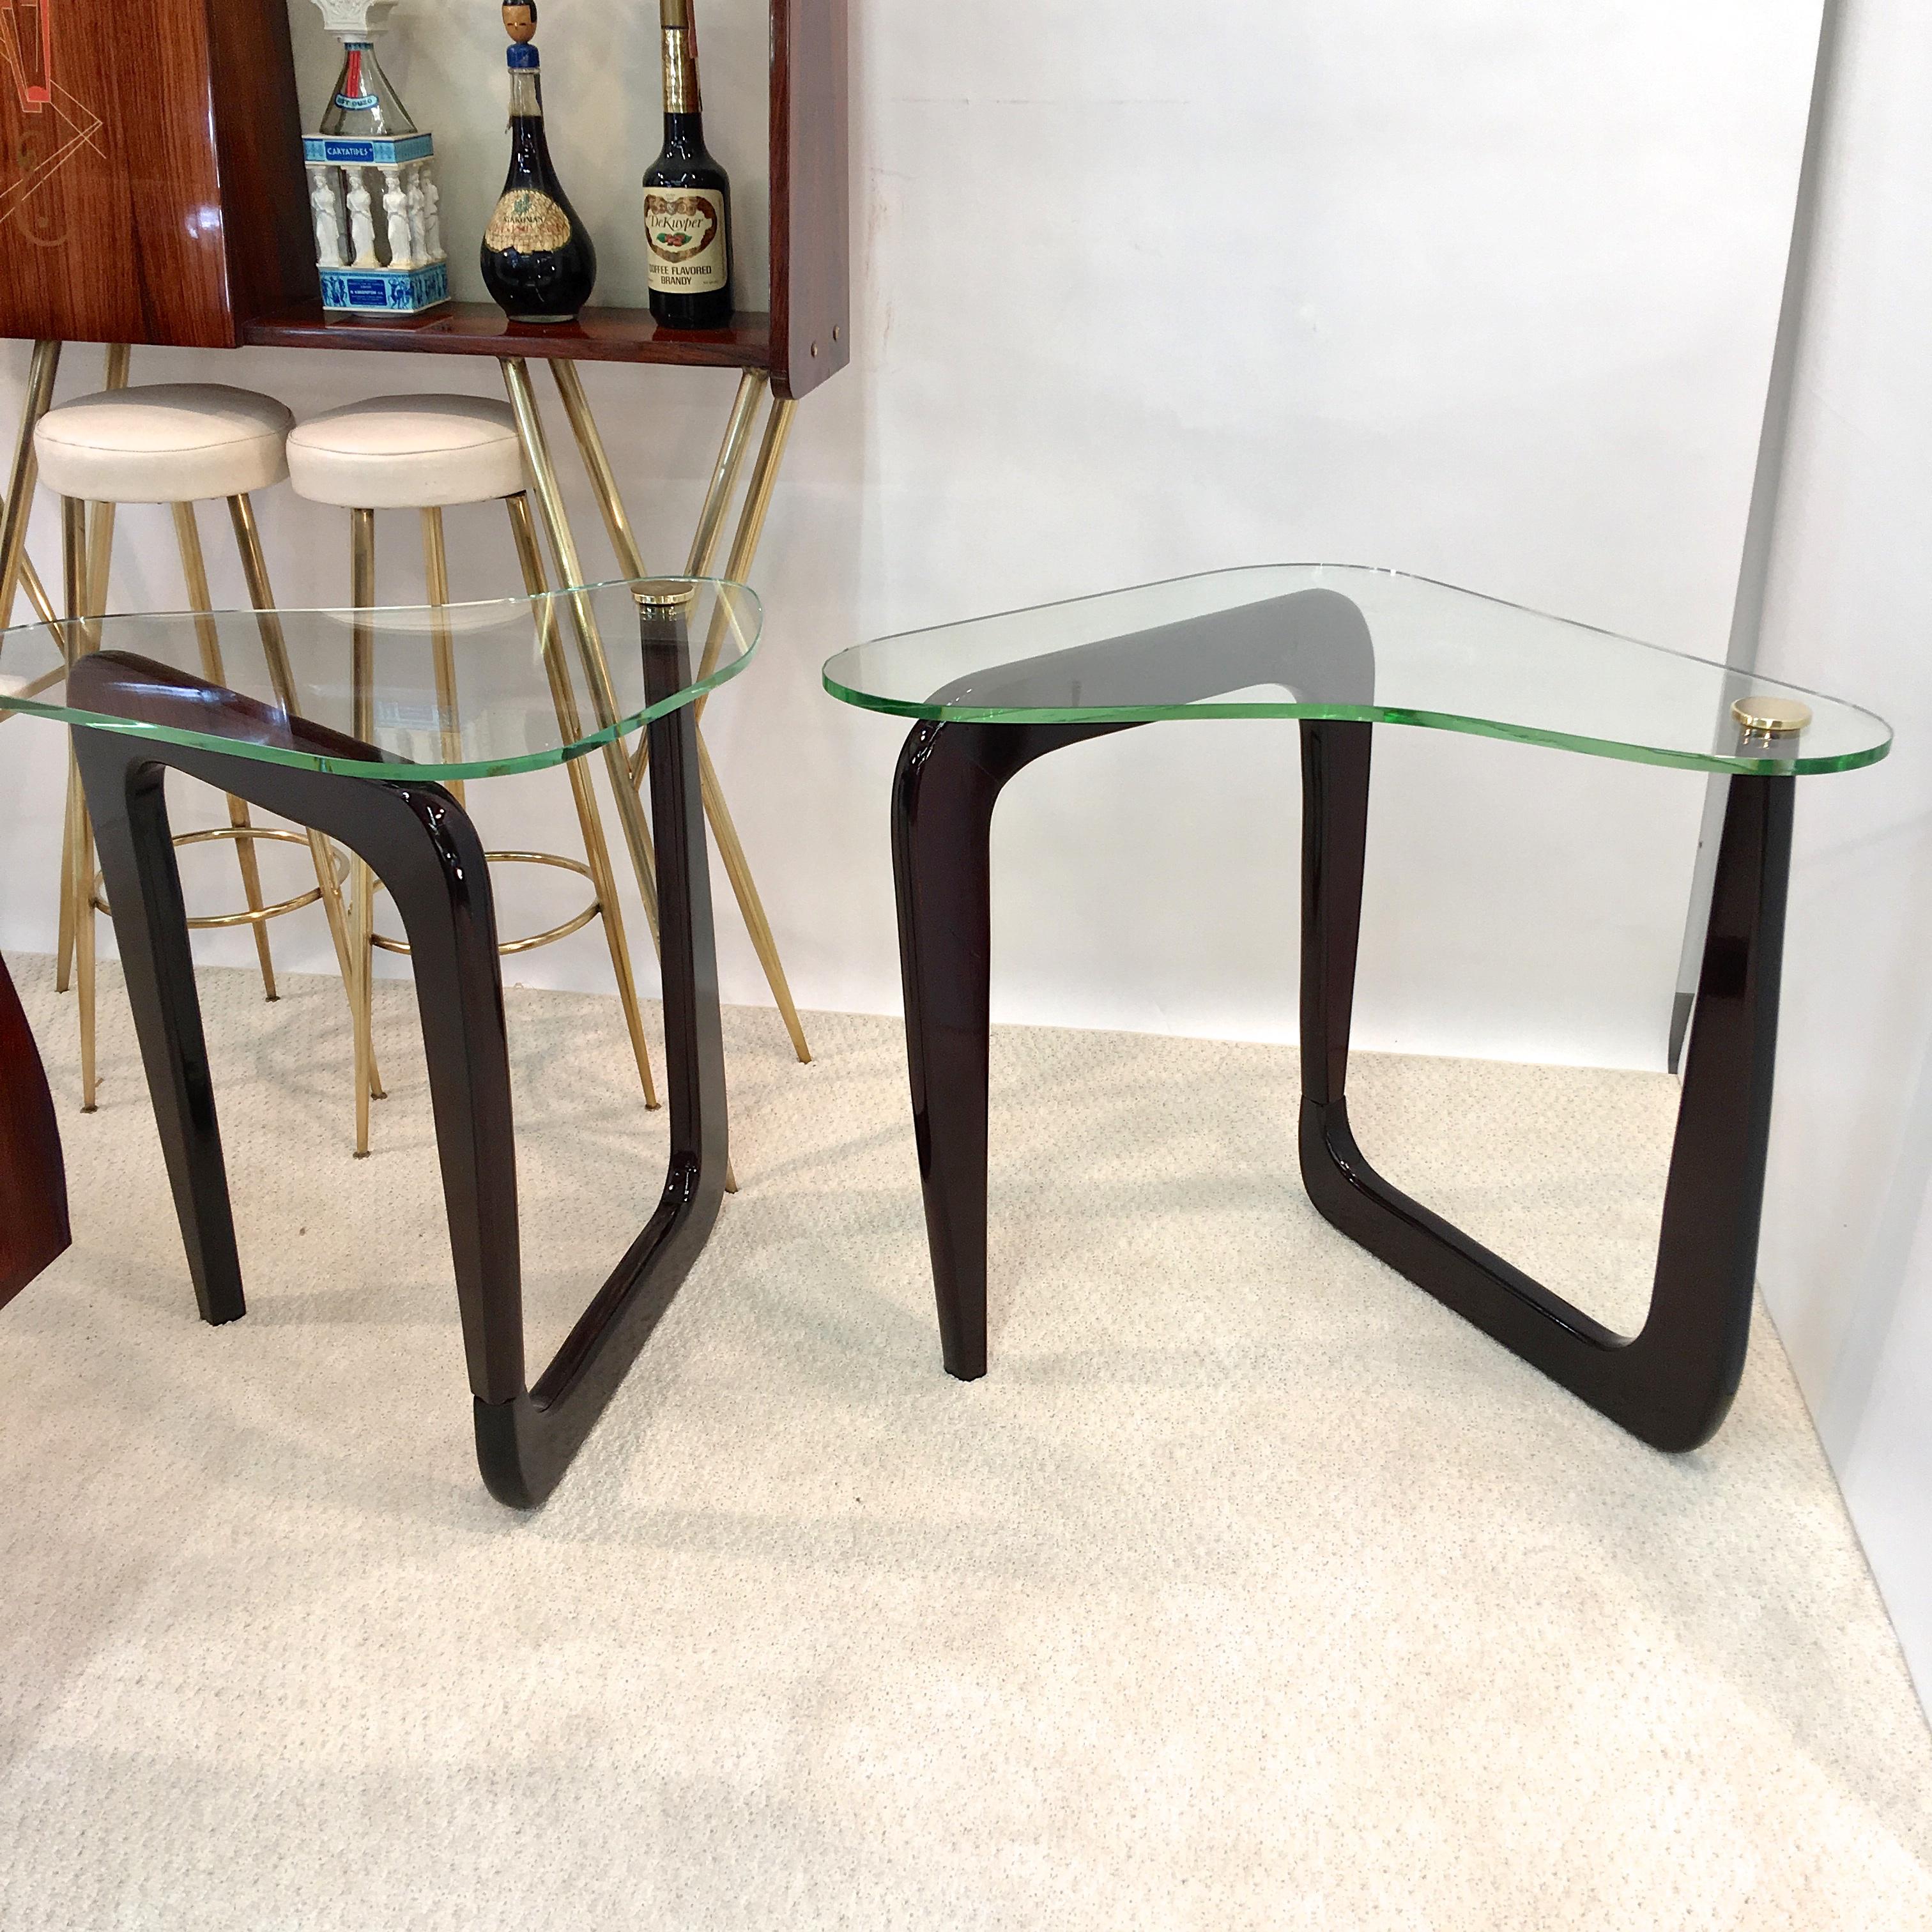 Pair of vintage 1960s sculptural and adjustable serpentine side or end tables, quite tall at 27 inches high, in ebonized oak topped with biomorphic shaped 3/8 inch thick glass top which is secured by a polished solid brass screw disk. The bases